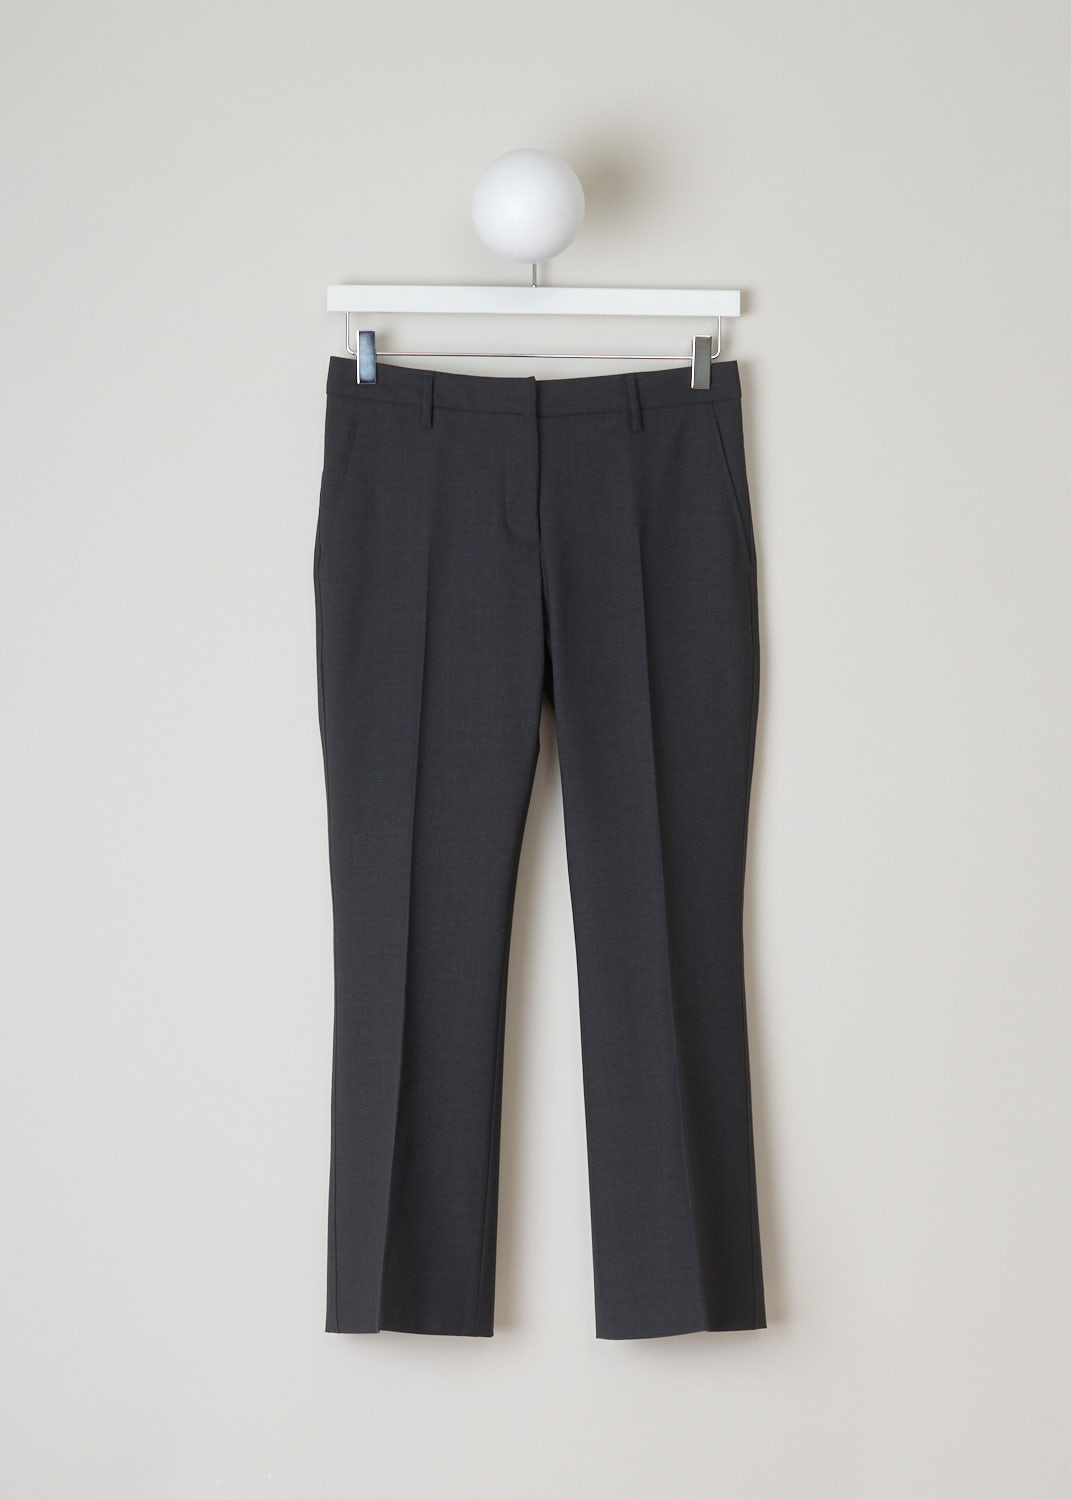 Brunello Cucinelli, Dark grey pants, M0W07P1951_C796, grey, front, Dark grey pants, featuring a flat front model. This low-cut model has a cropped length, slanted pockets at the front and two welt pockets at the back. Fastening option on this model is a zipper, a metal clip and a backing button. 